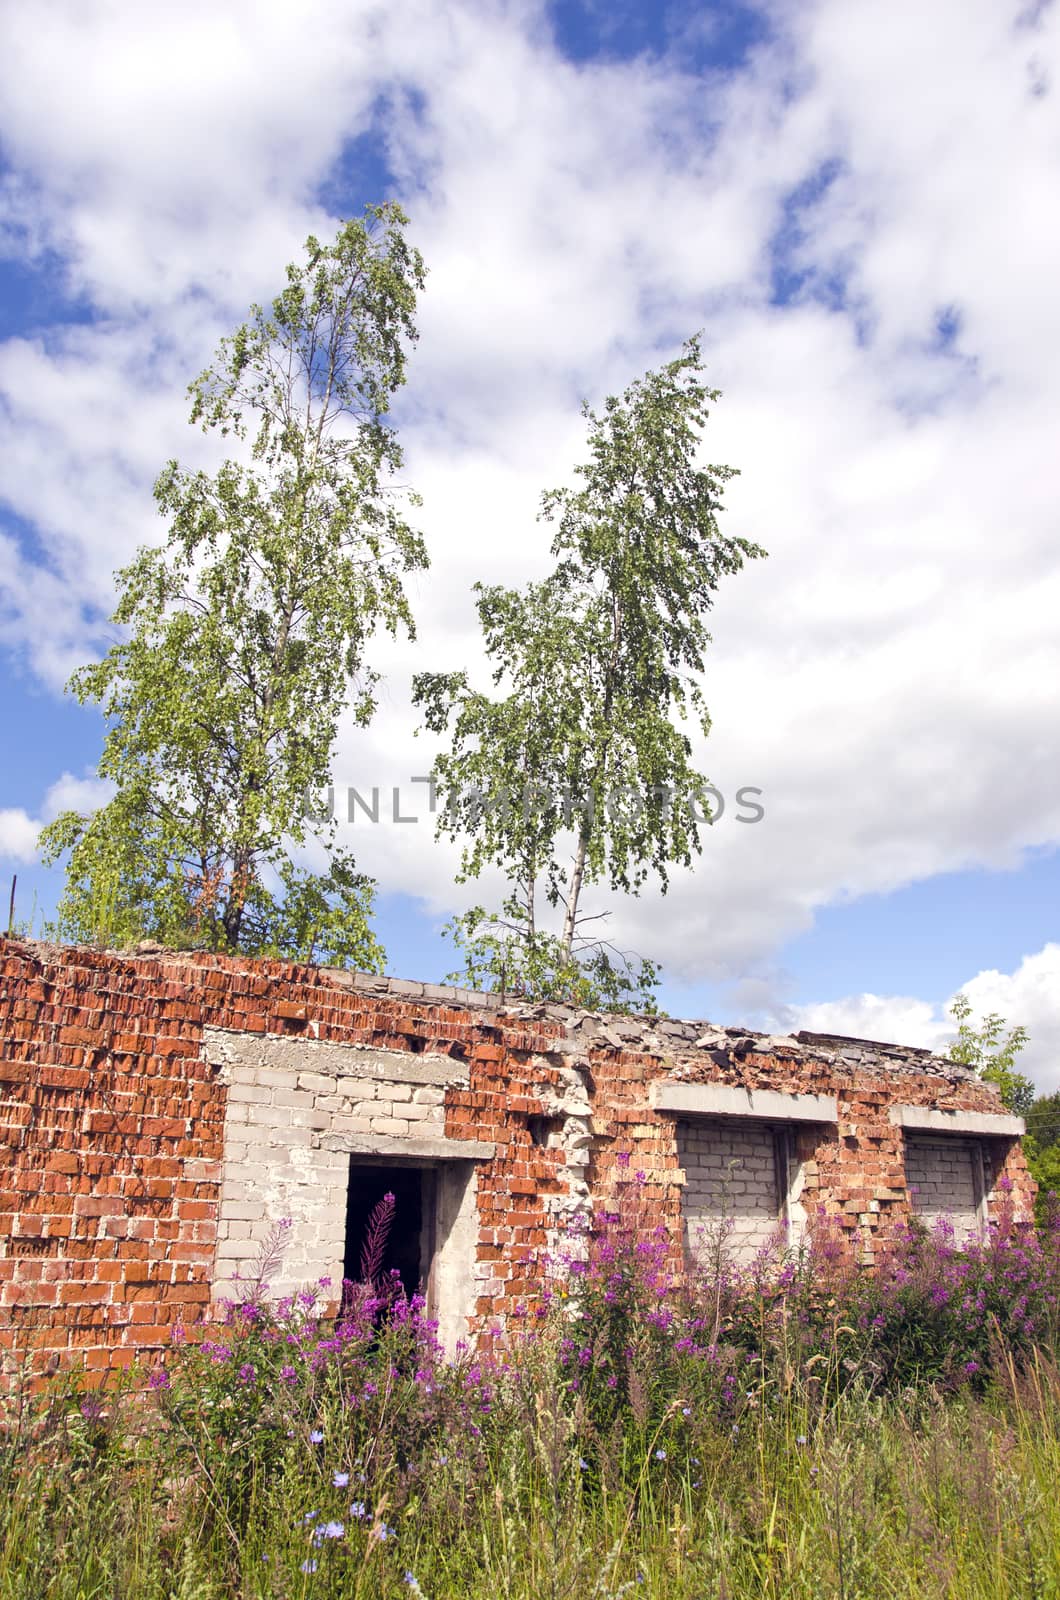 Desolate roofless and windowless brick house with birch trees growing through